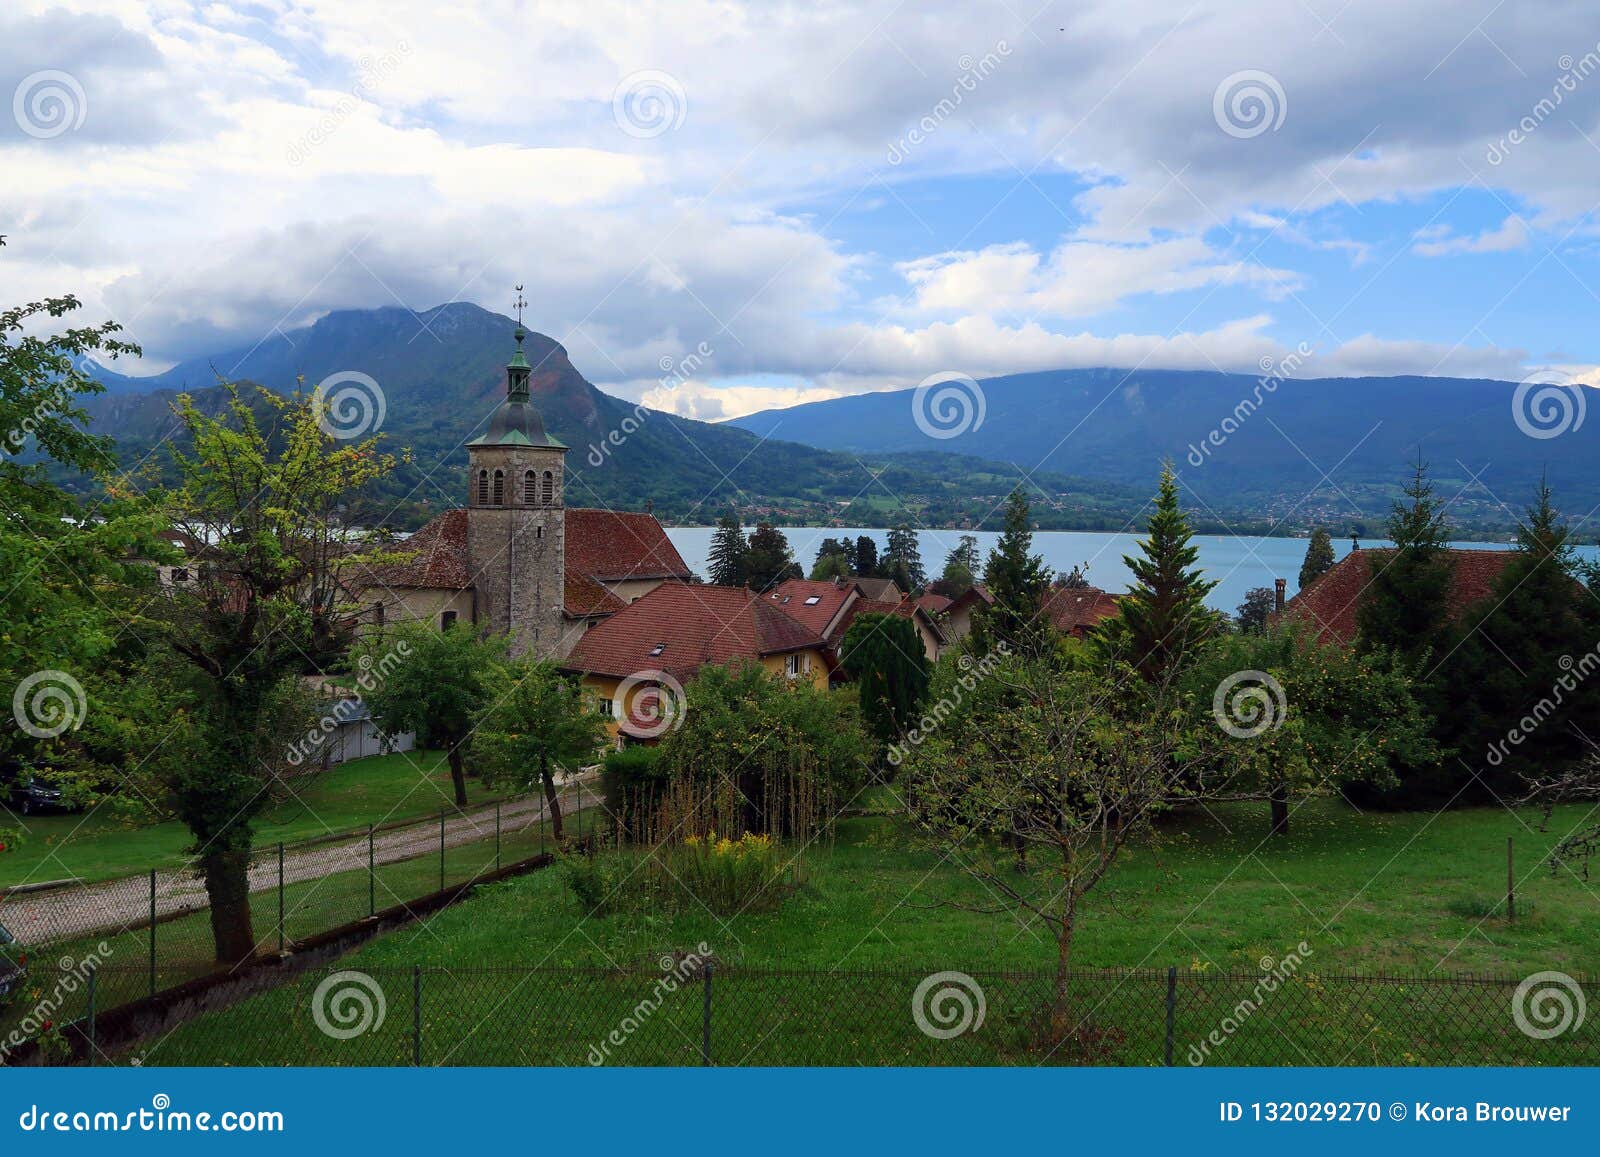 Church in Village of Talloires Near French Alps with 